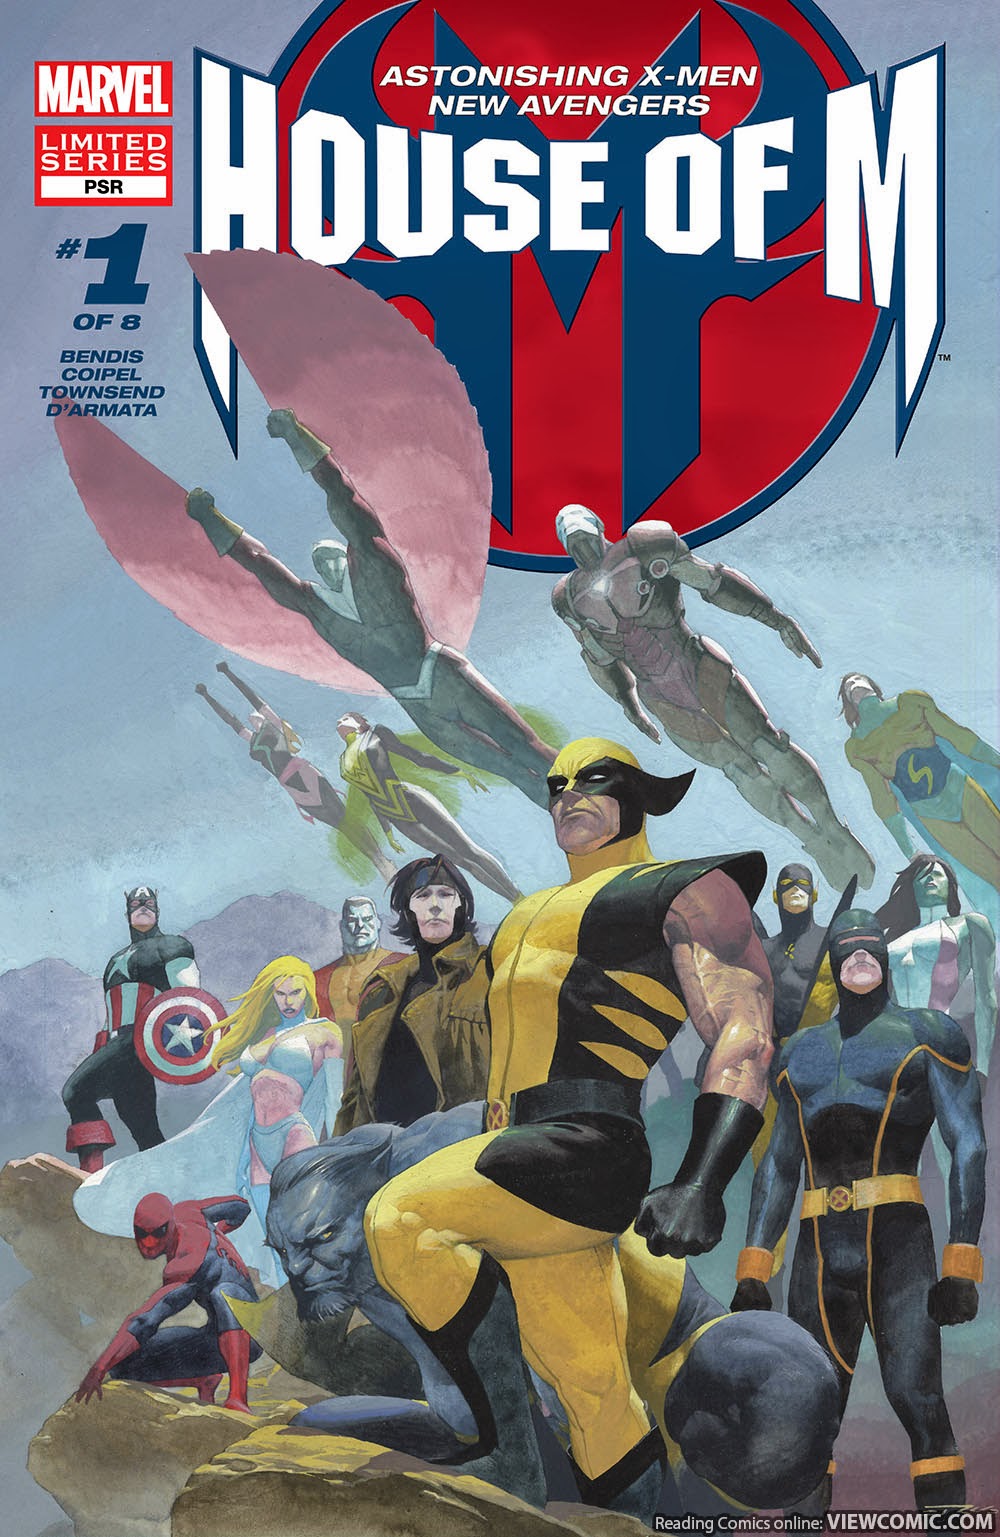 Read house of m online